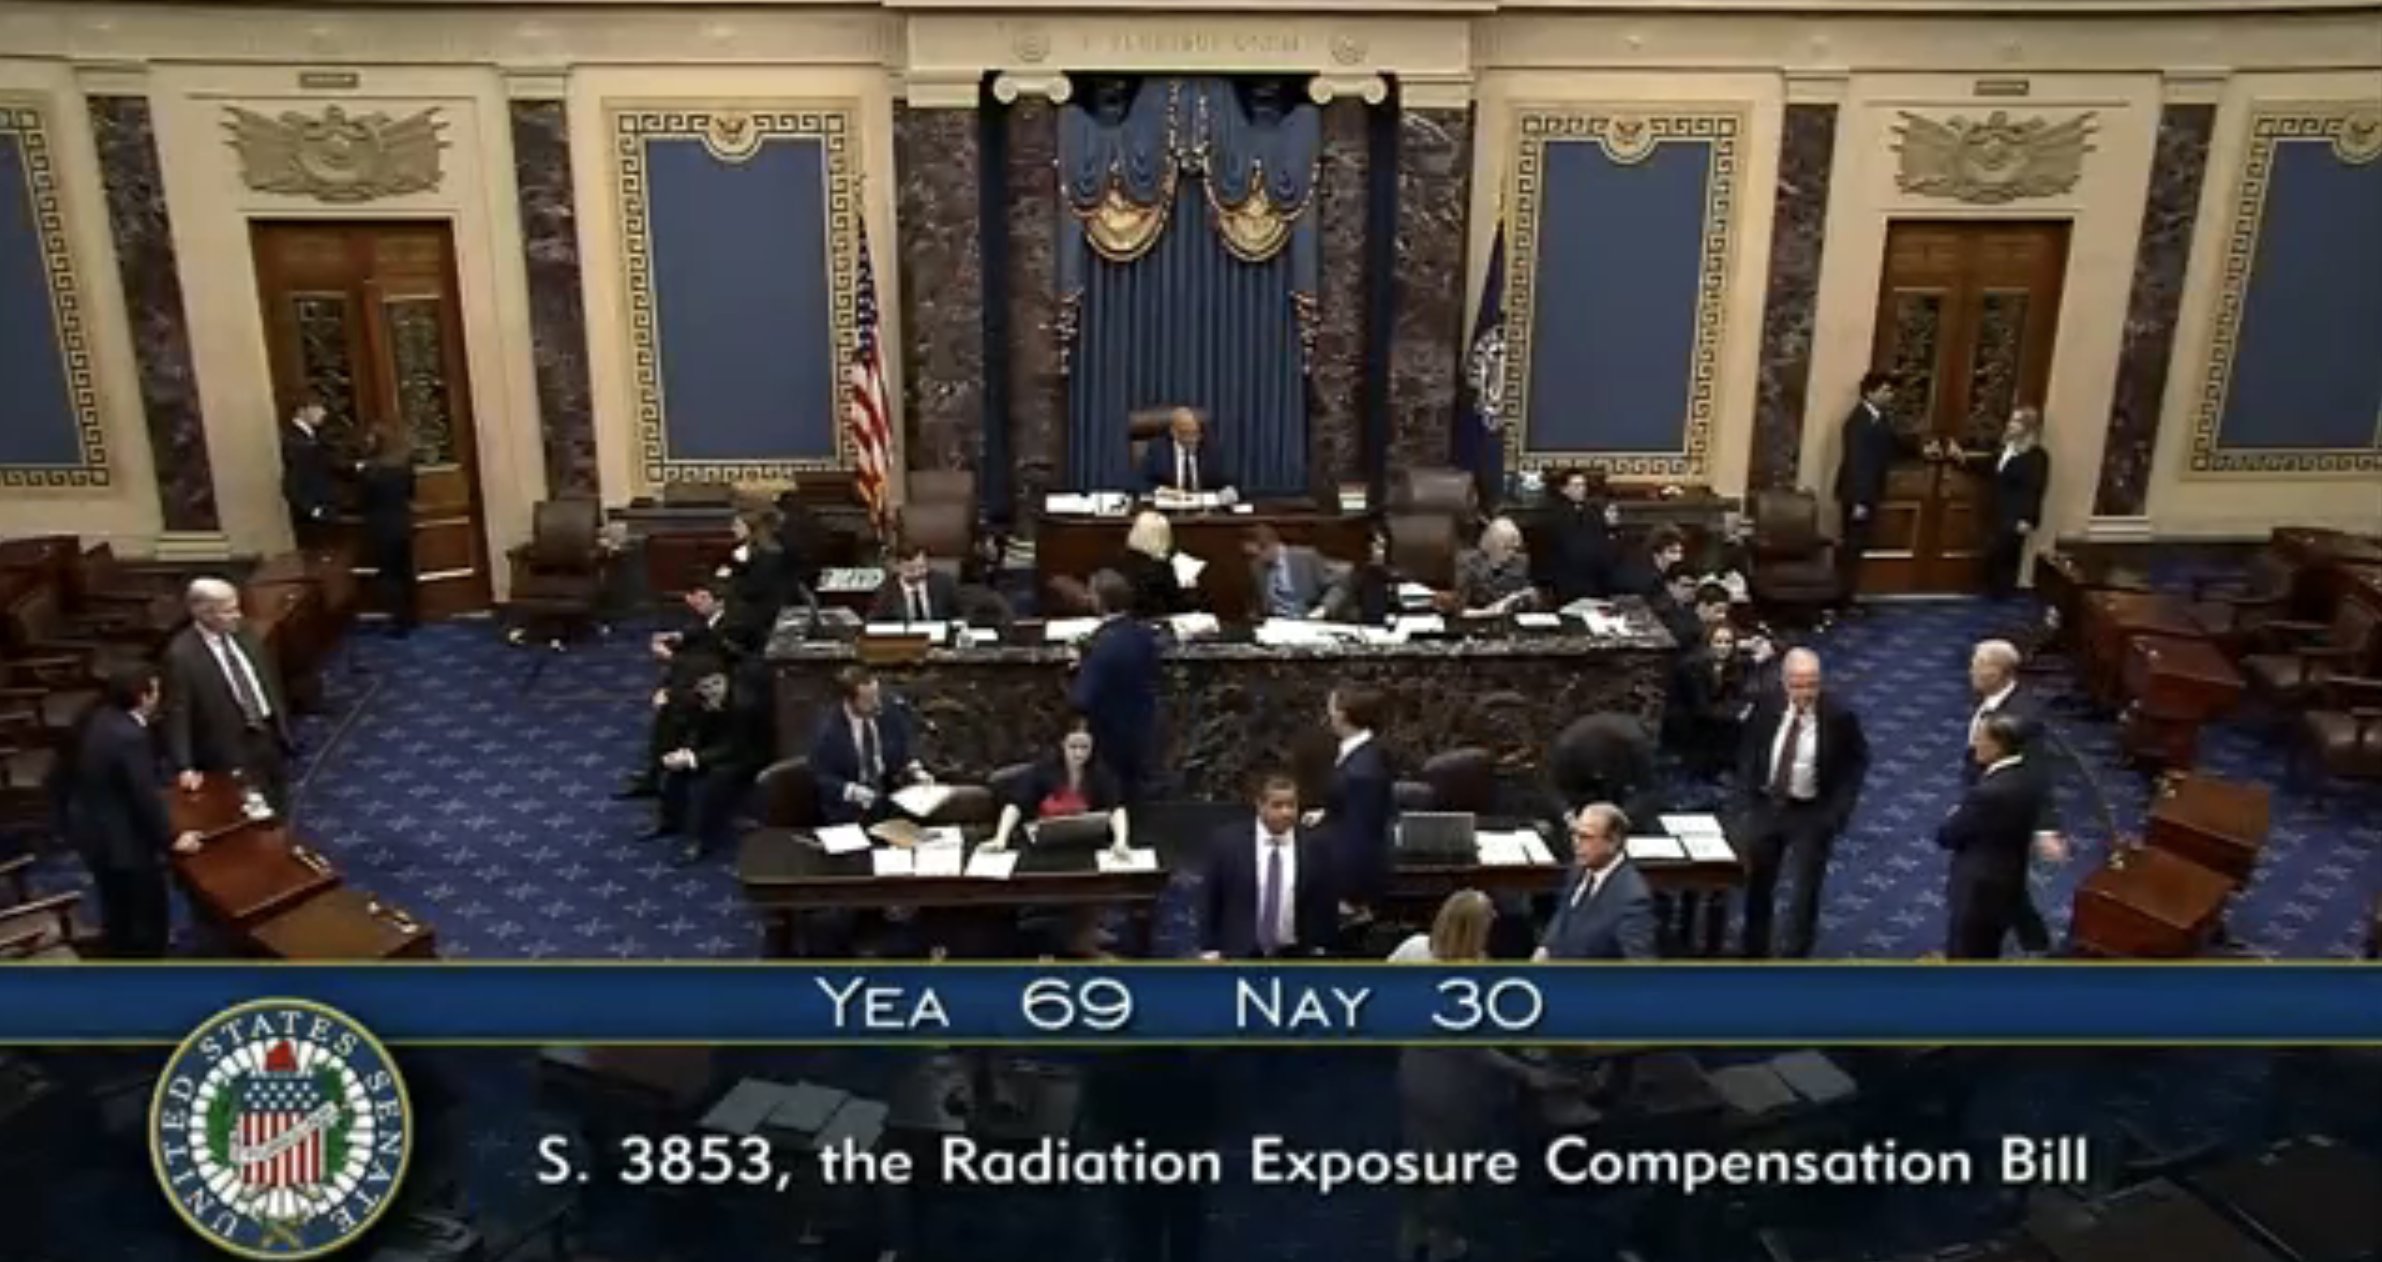 The U.S. Senate voted on Thursday to expand eligibility and extend the life of a fund for people exposed to radiation by the federal government, by a vote of 69 to 30. (C-SPAN)